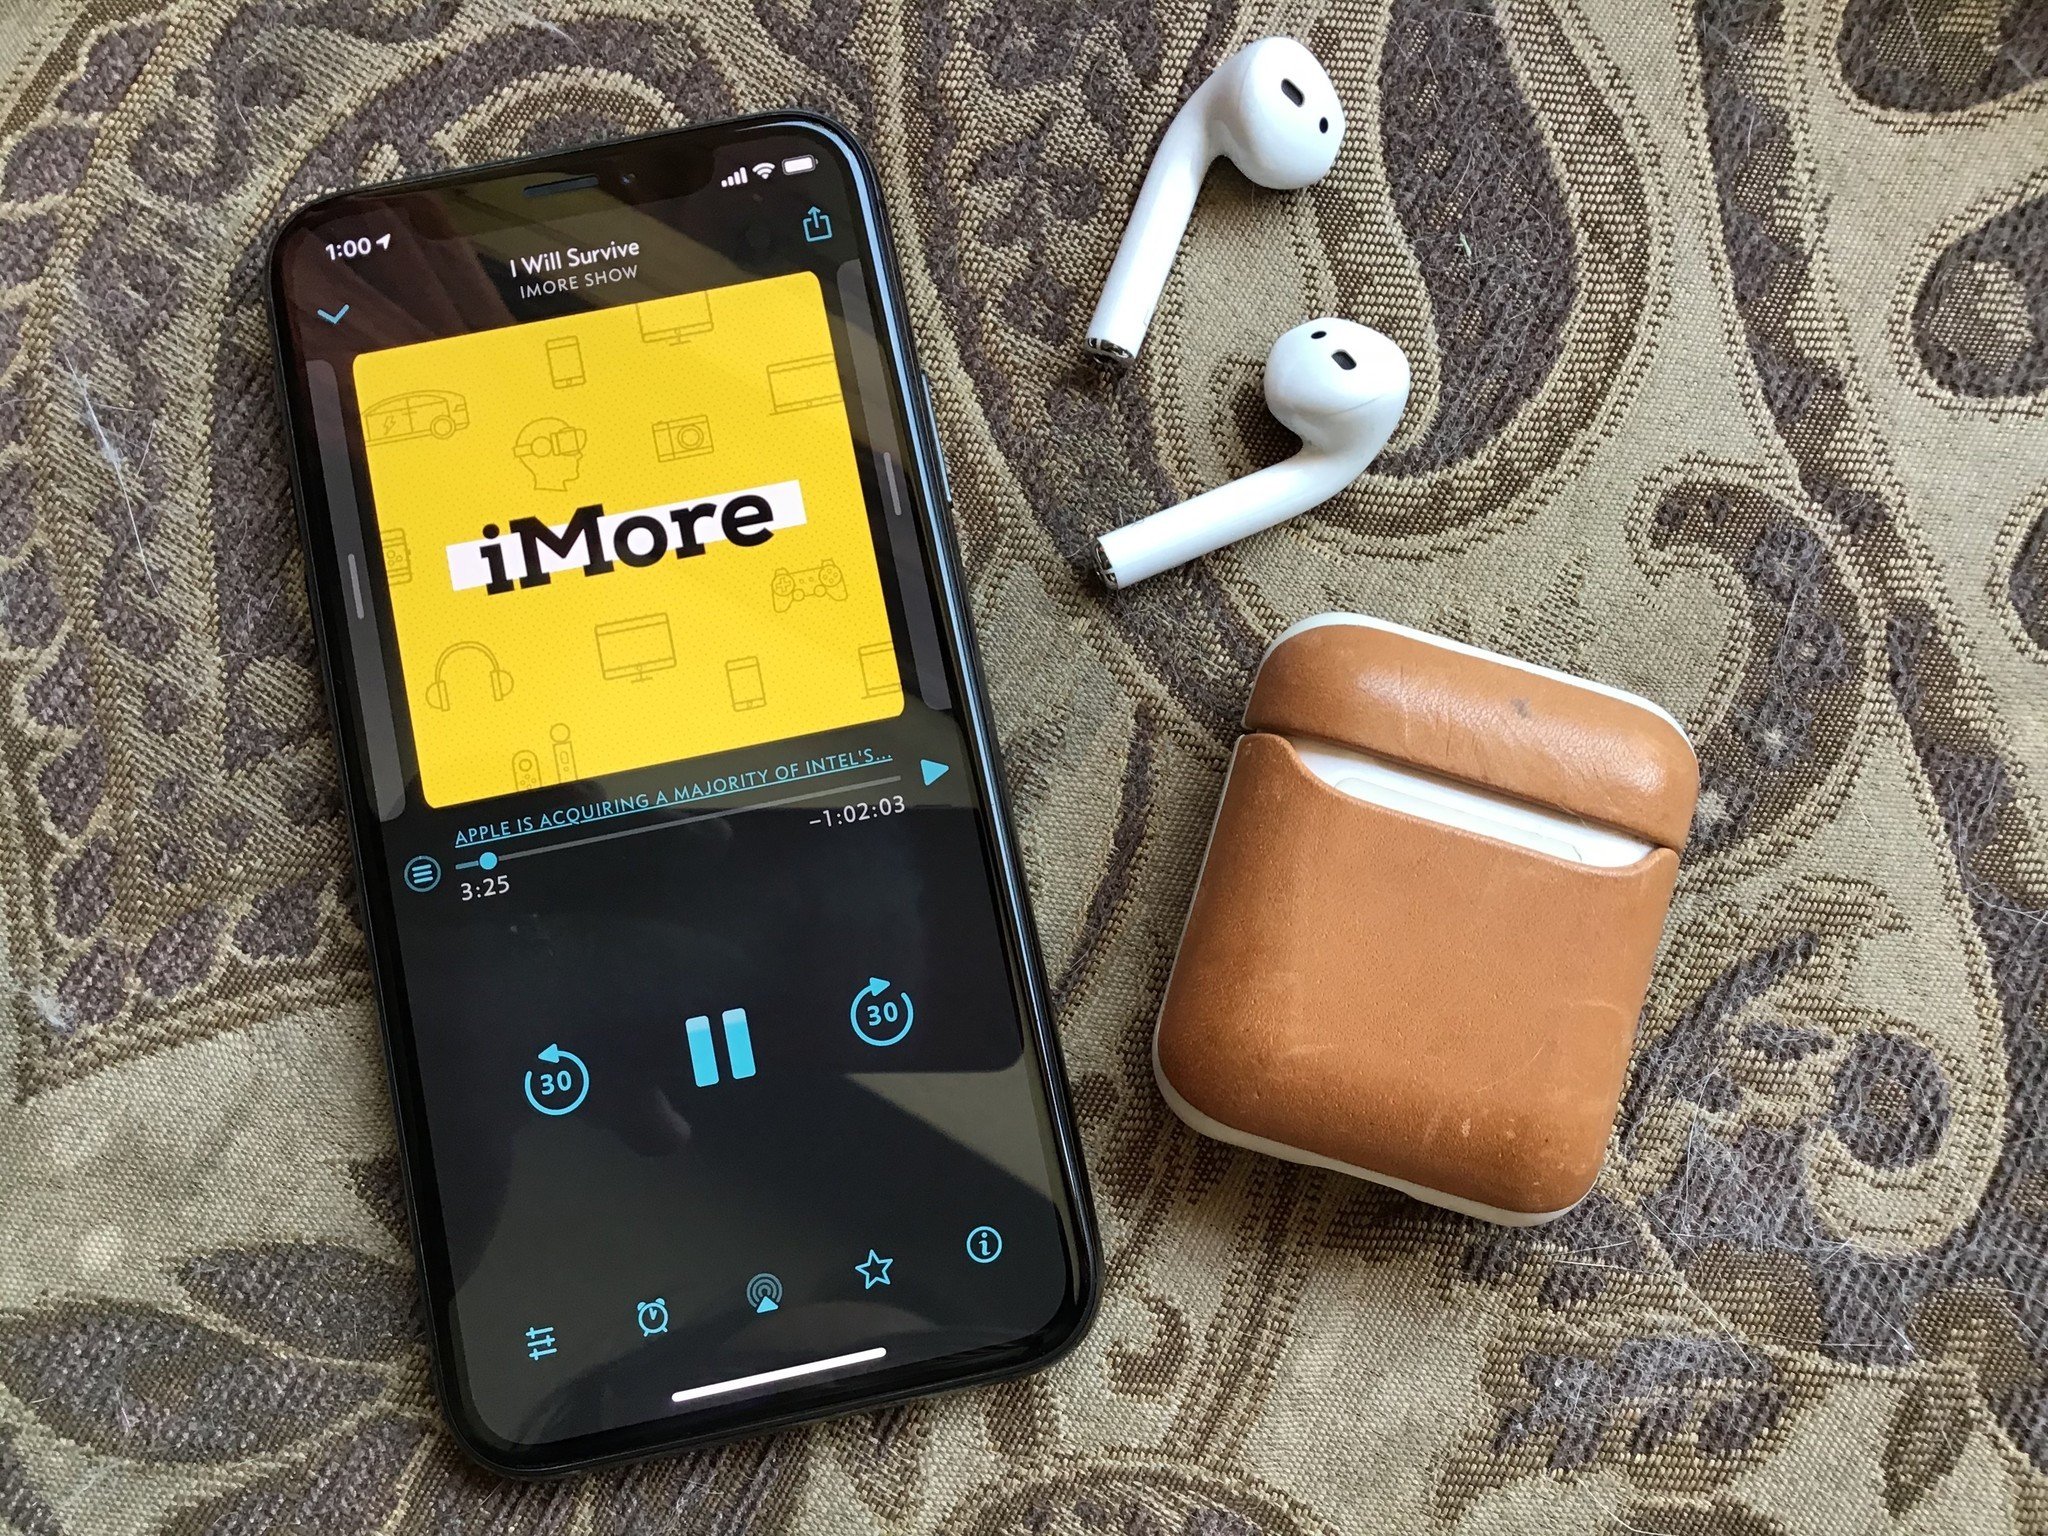 iMore Show on iPhone